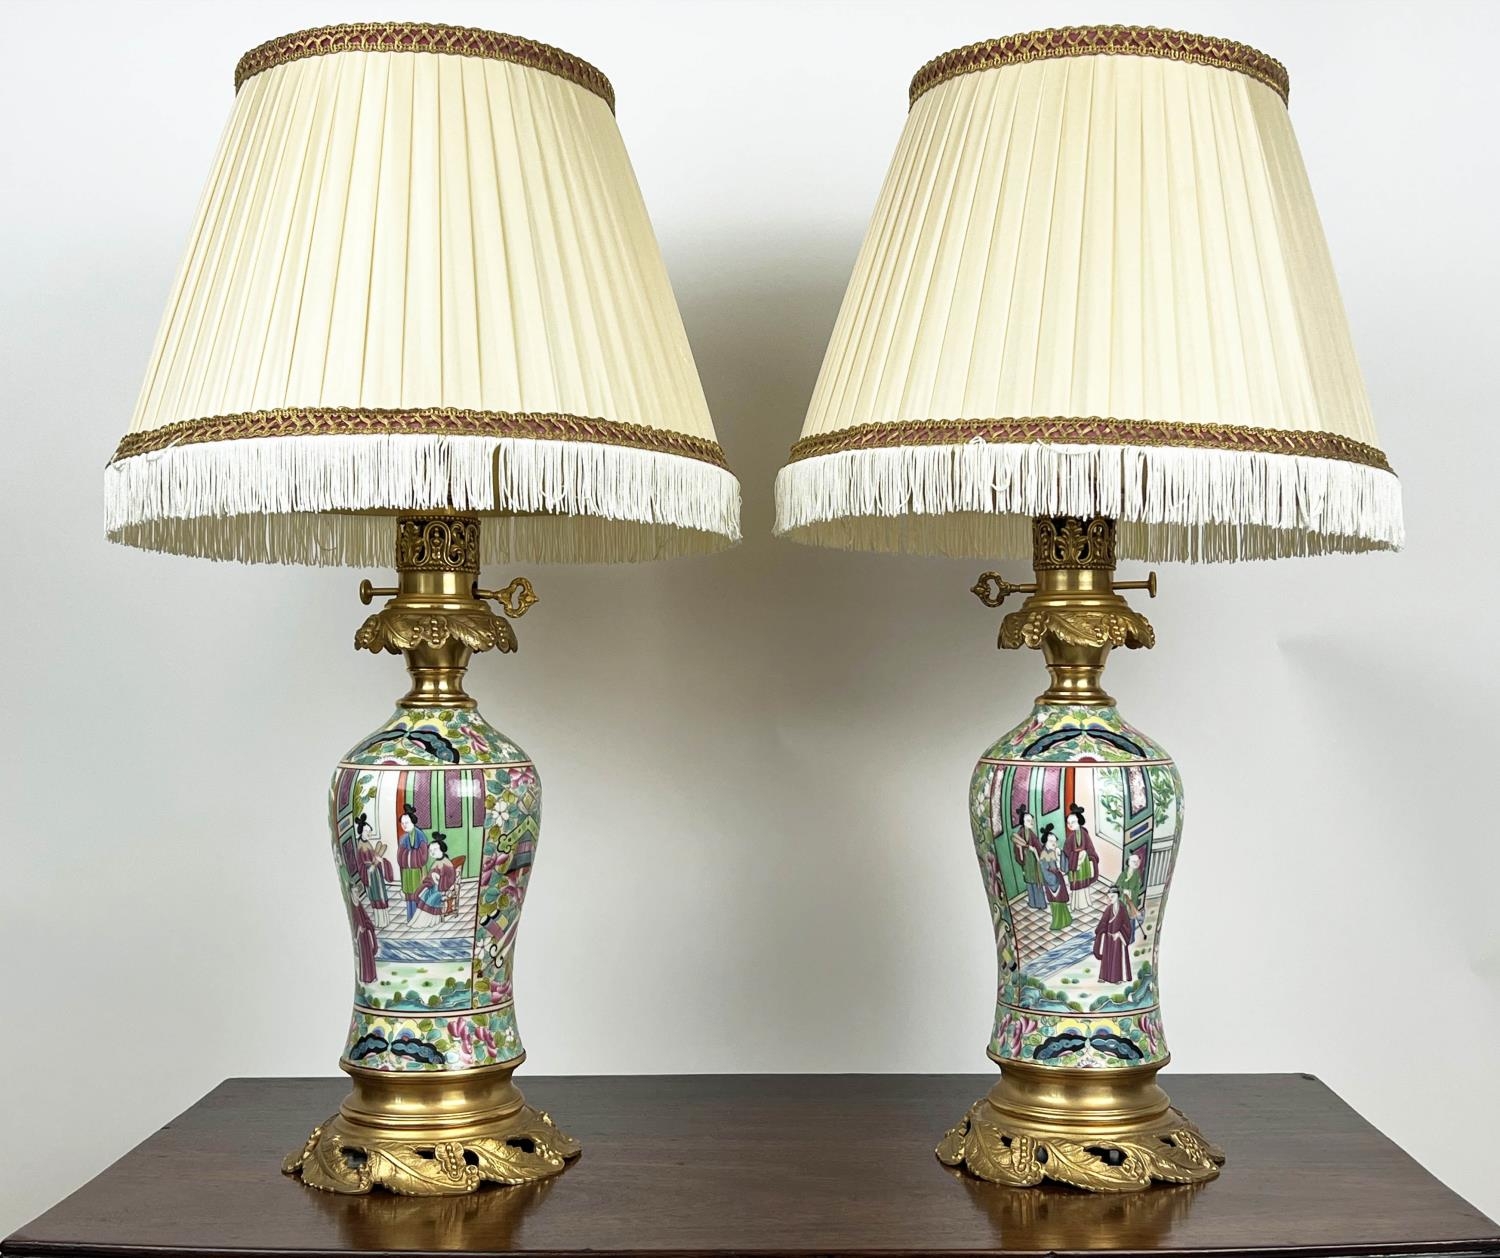 TABLE LAMPS, a pair, Cantonese hand-painted porcelain baluster form with fine ormolu mounts and silk